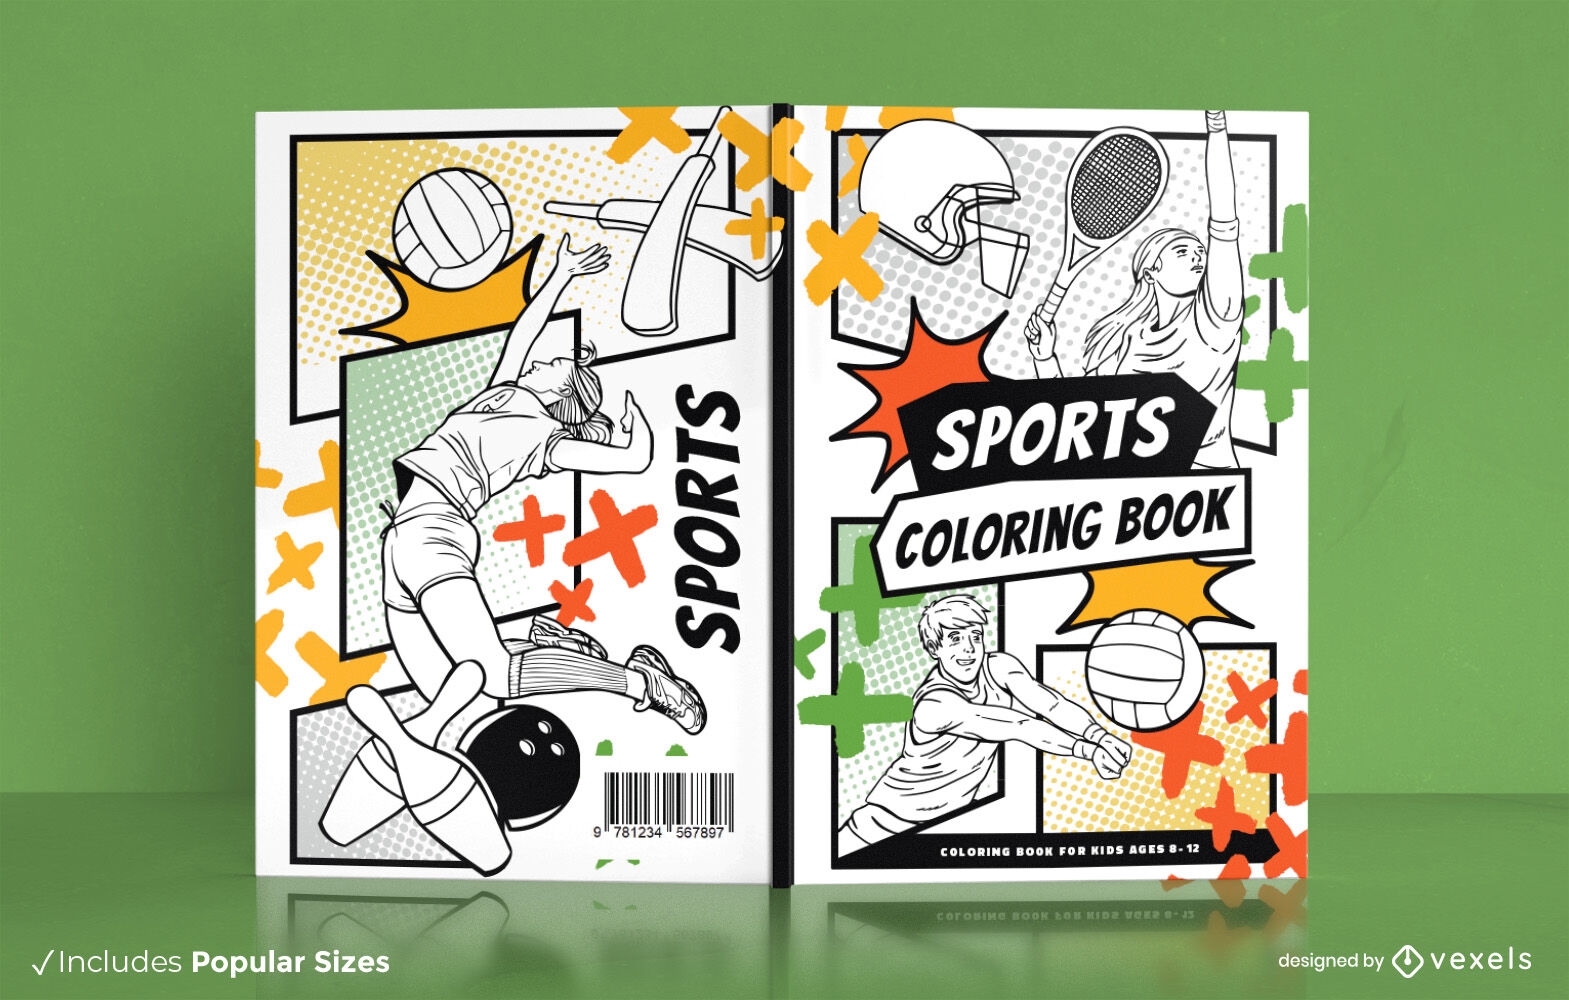 Sports Coloring Books For Kids Ages 8-12: Includes Basketball